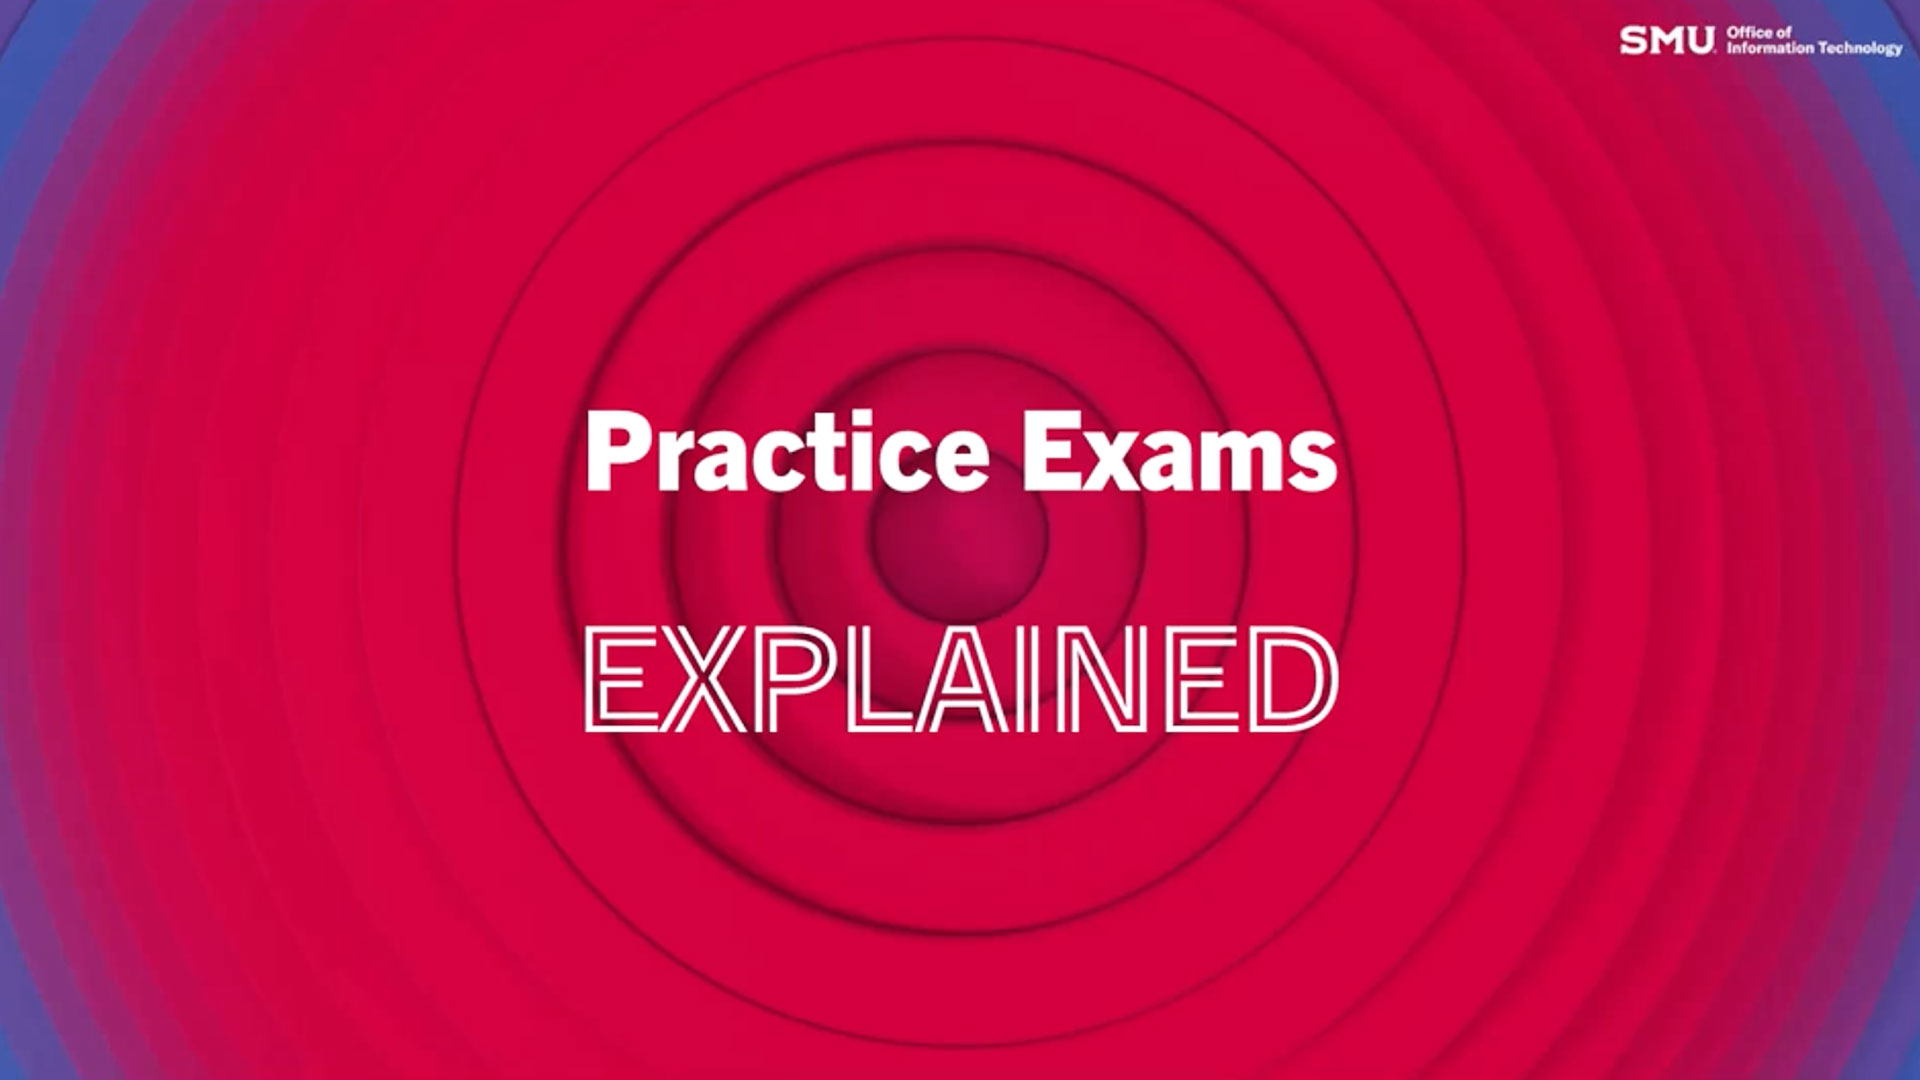 The words "Practice Exams Explained" over a red background